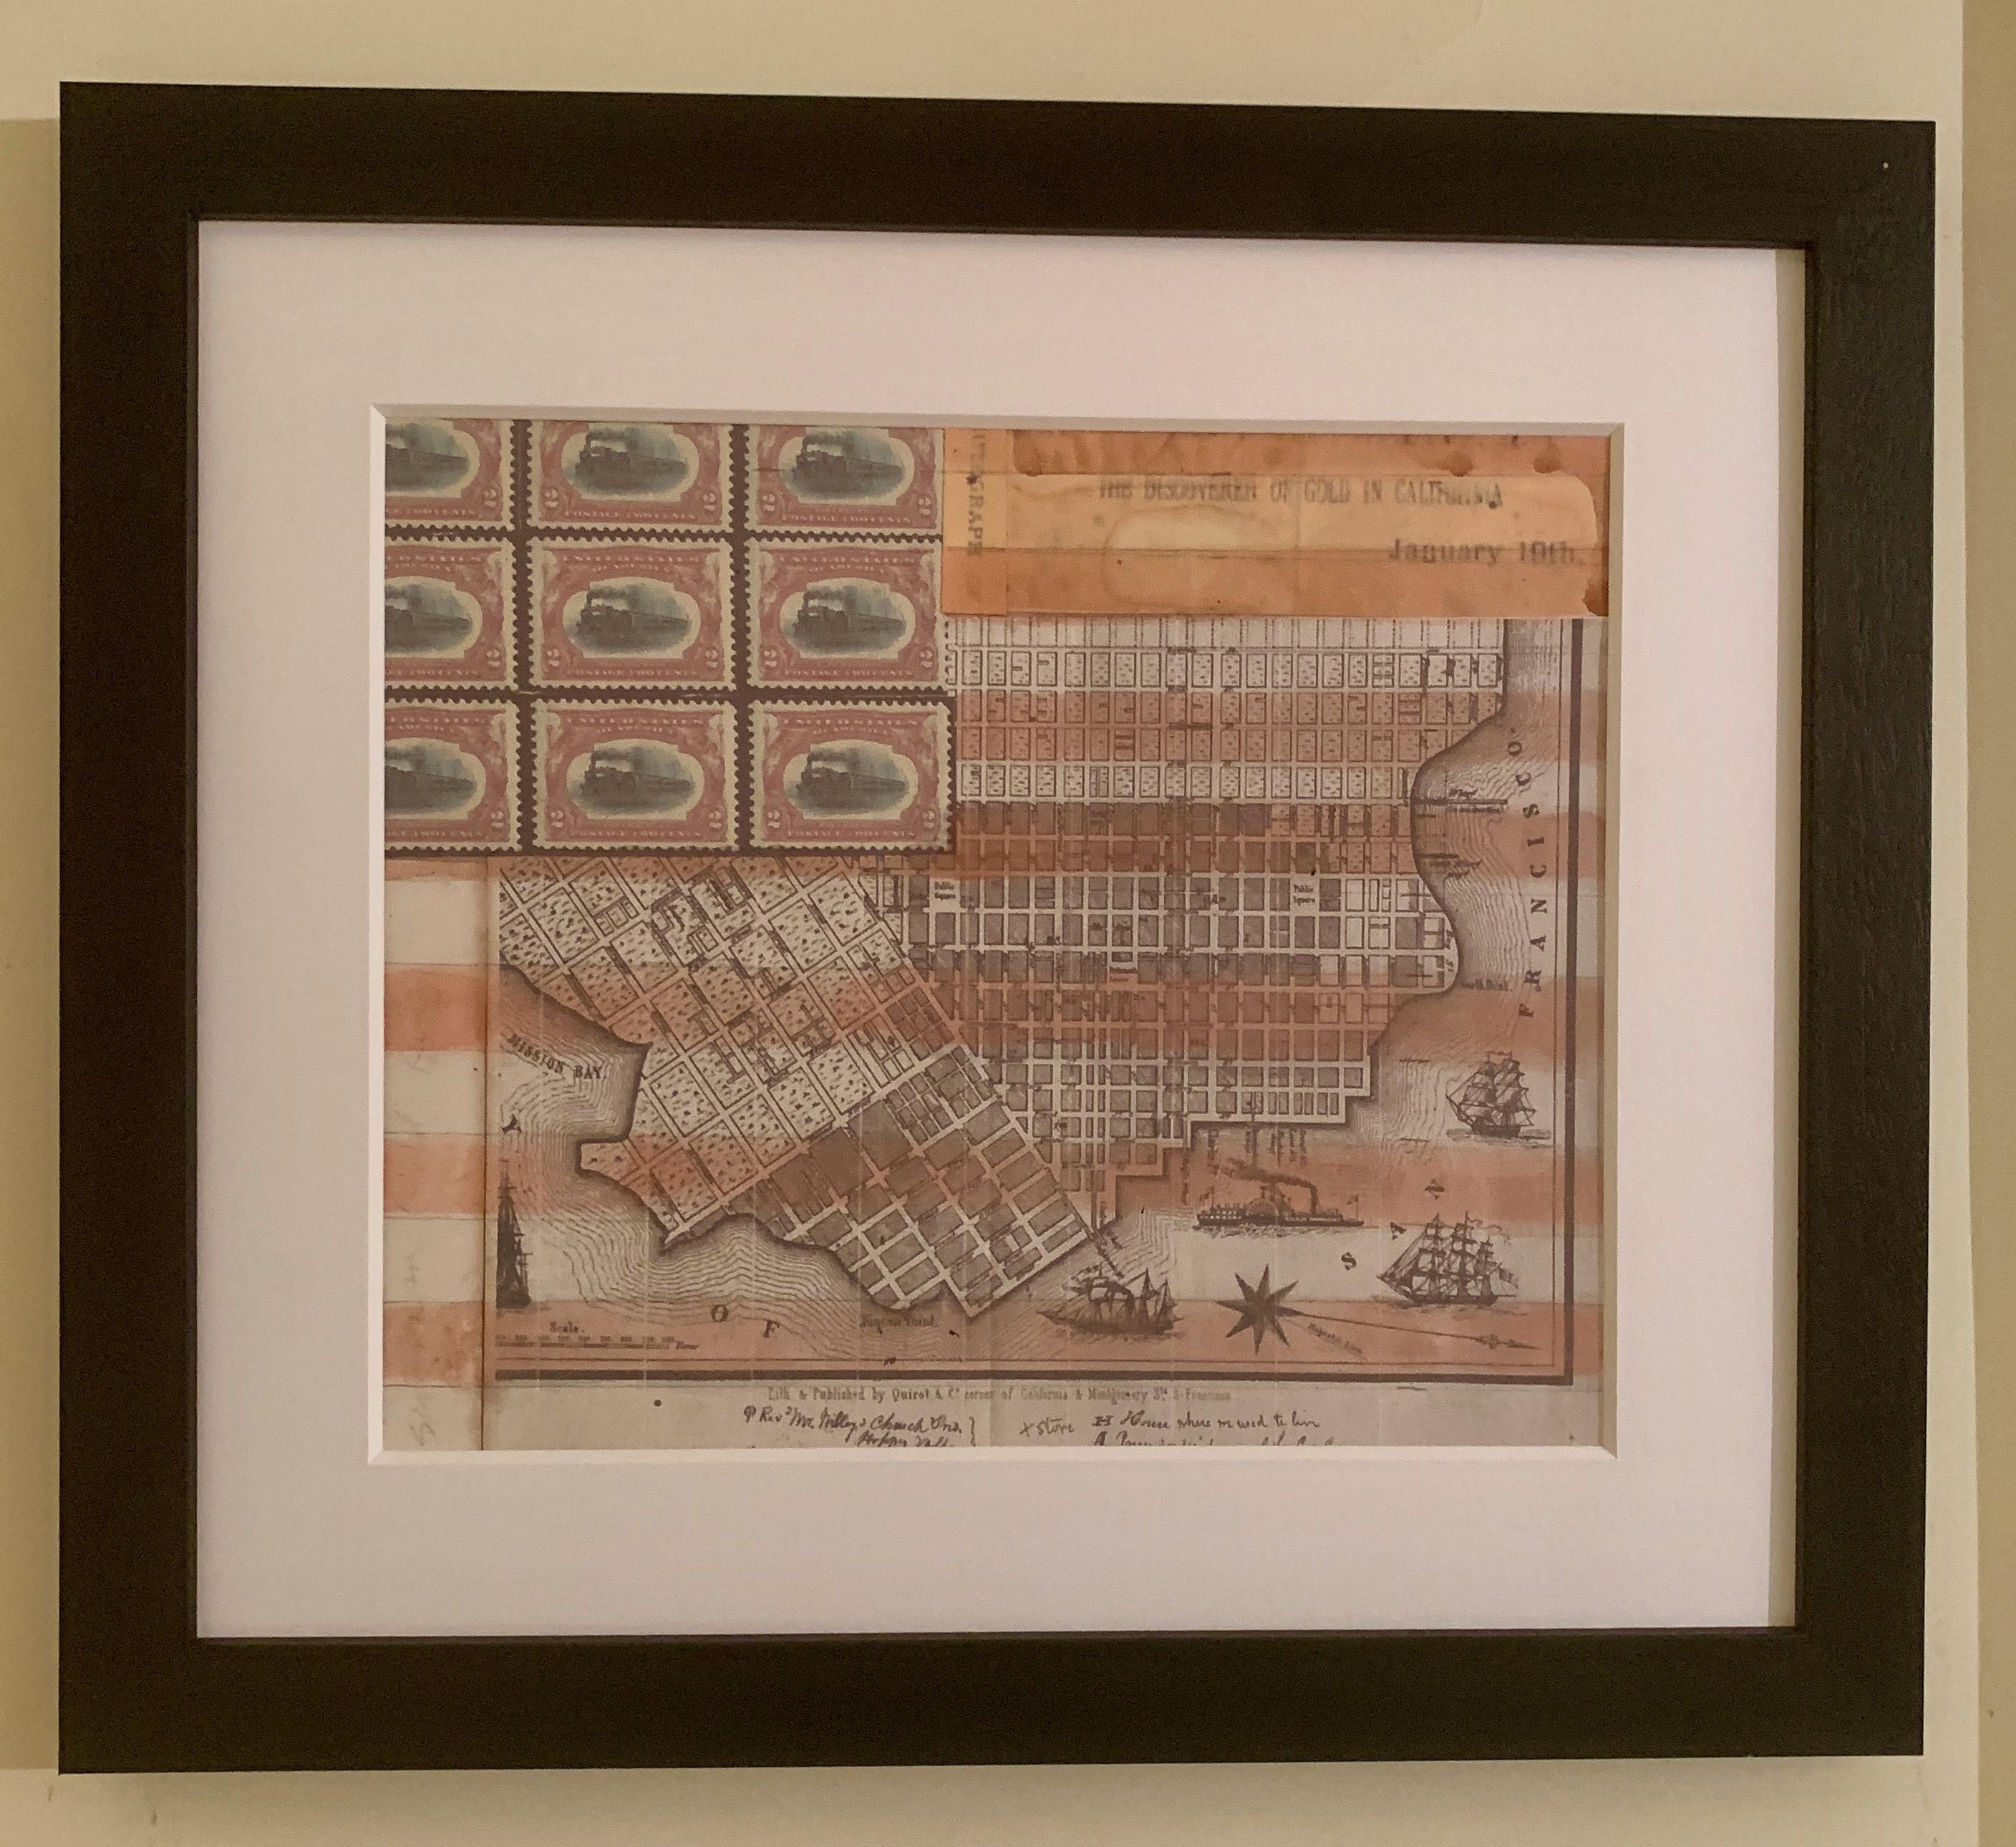 American flag collage with hand colored scene of 19th c San Francisco California